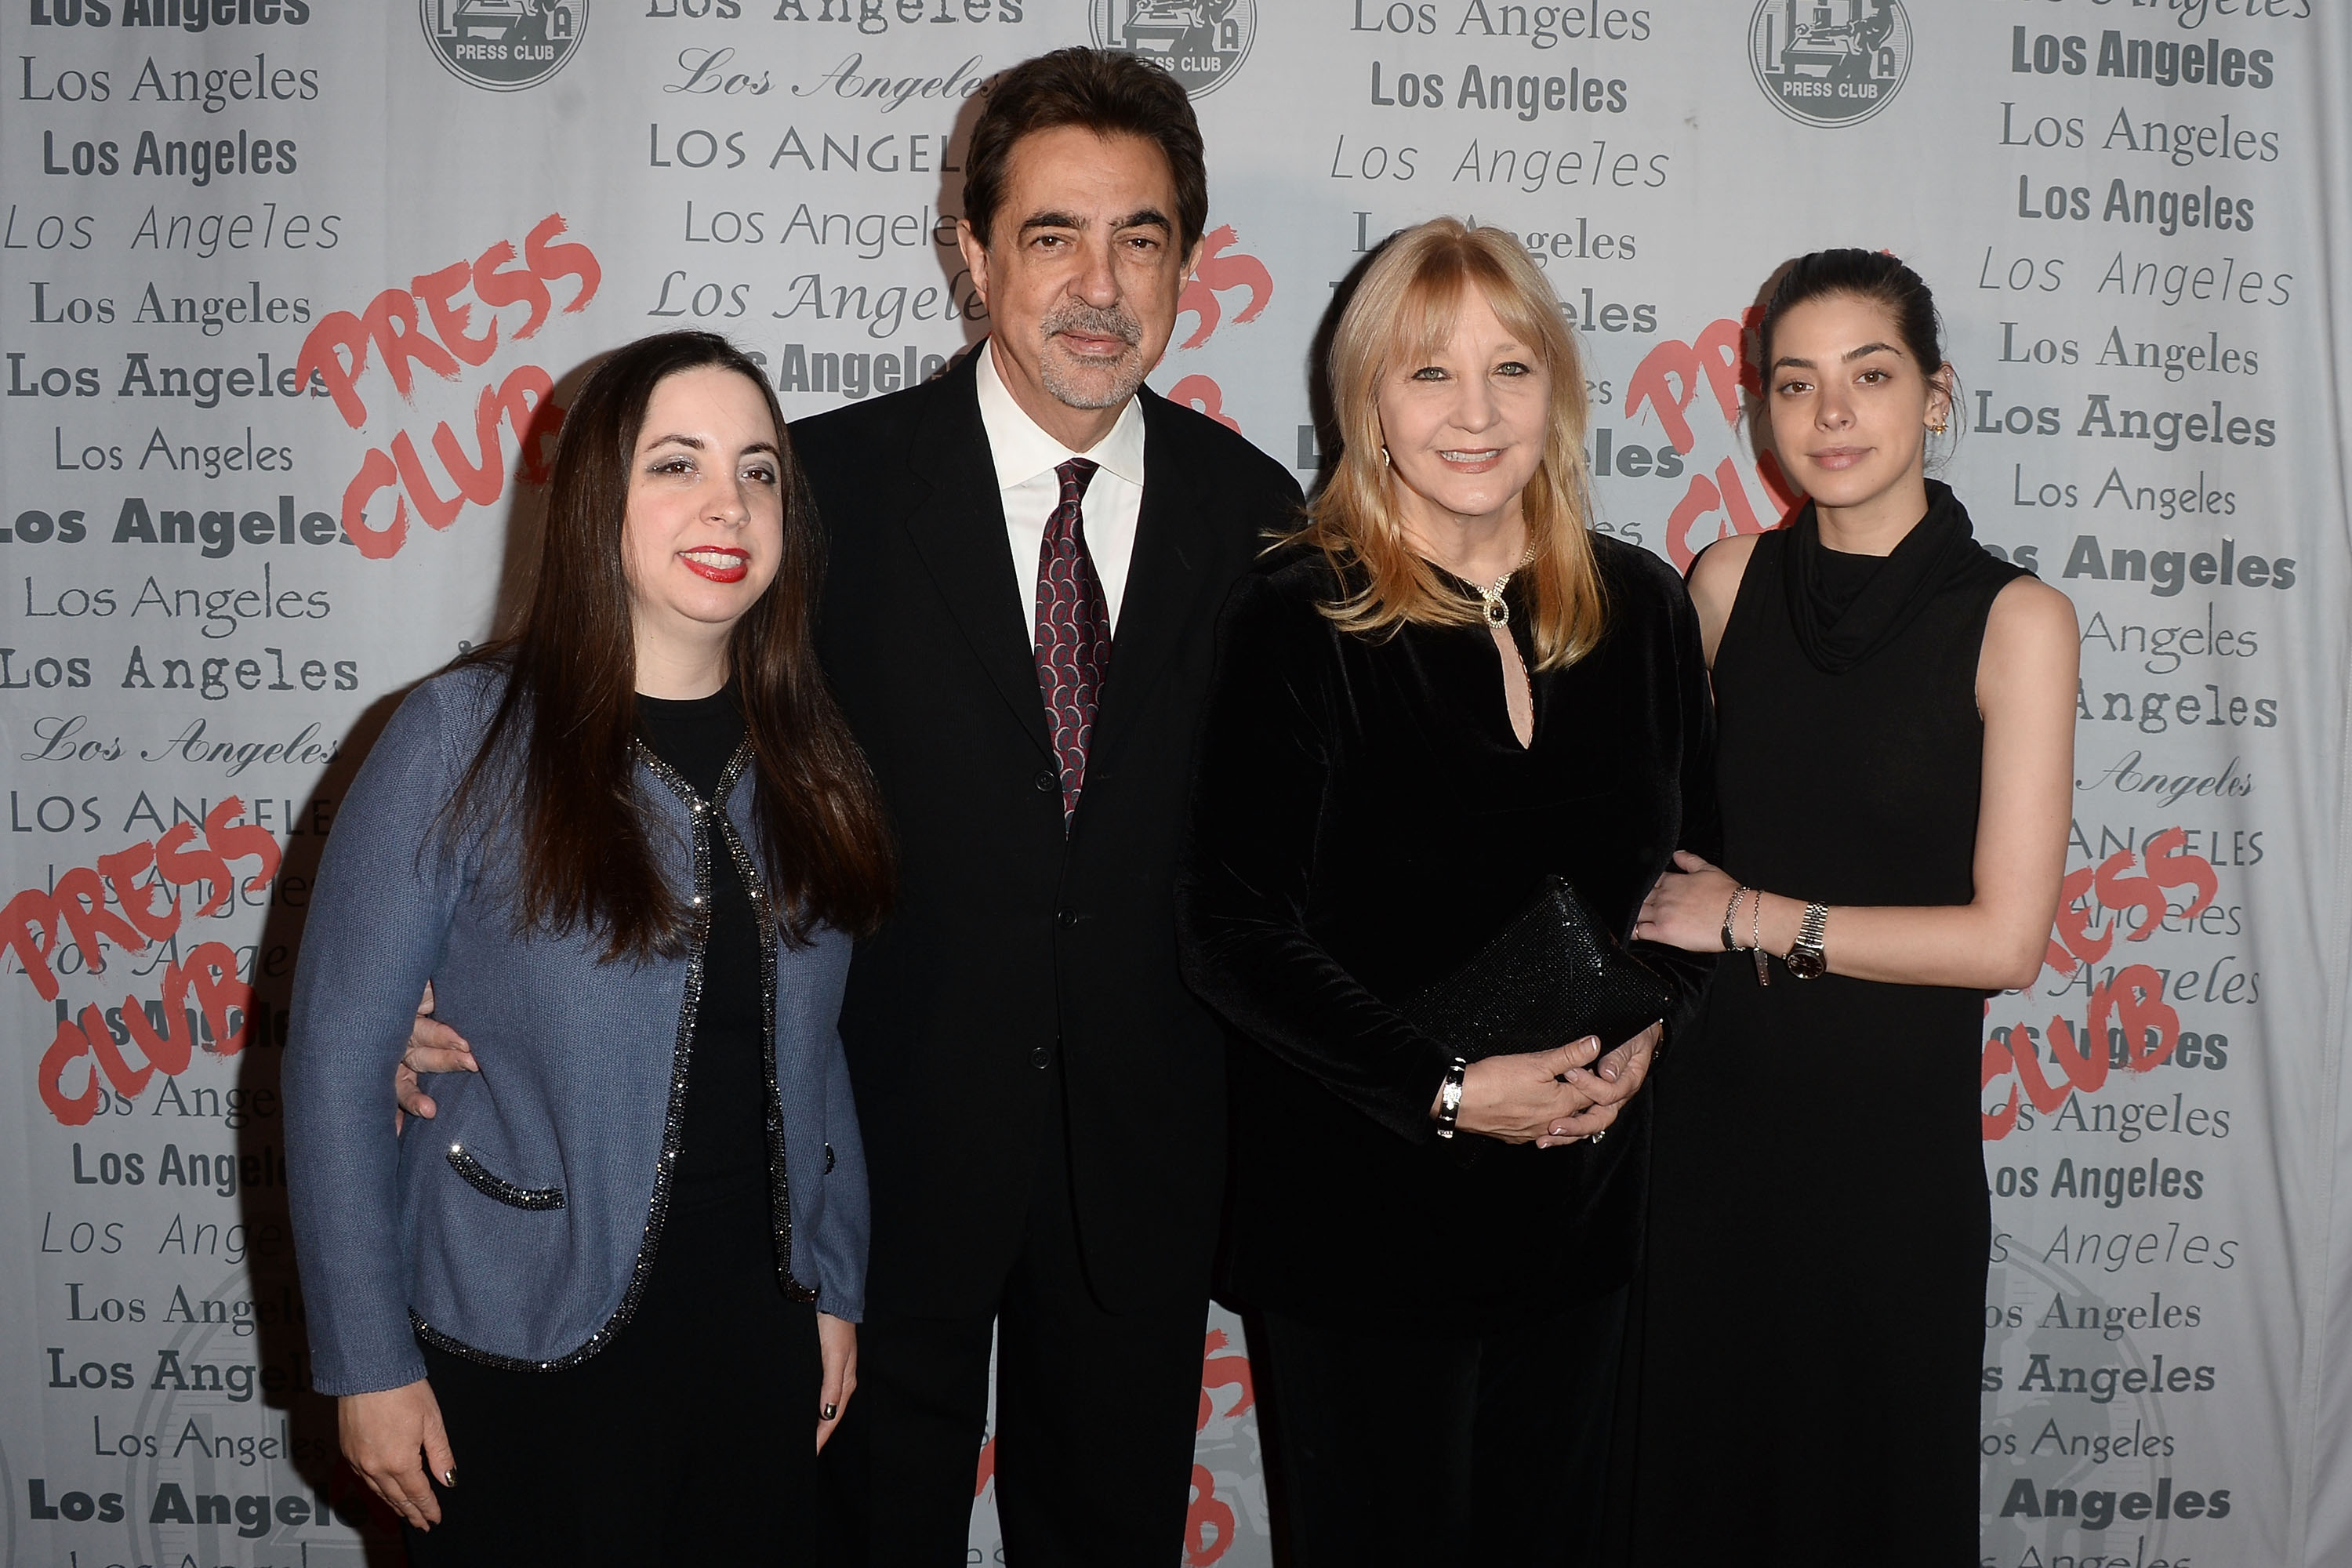 (L-R) Mia Mantegna, Joe Mantegna, Arlene Vrhel, and Gia Mantegna arrive at the National Arts and Entertainment Journalism Awards Gala at Millennium Biltmore Hotel on December 6, 2015, in Los Angeles, California. | Source: Getty Images